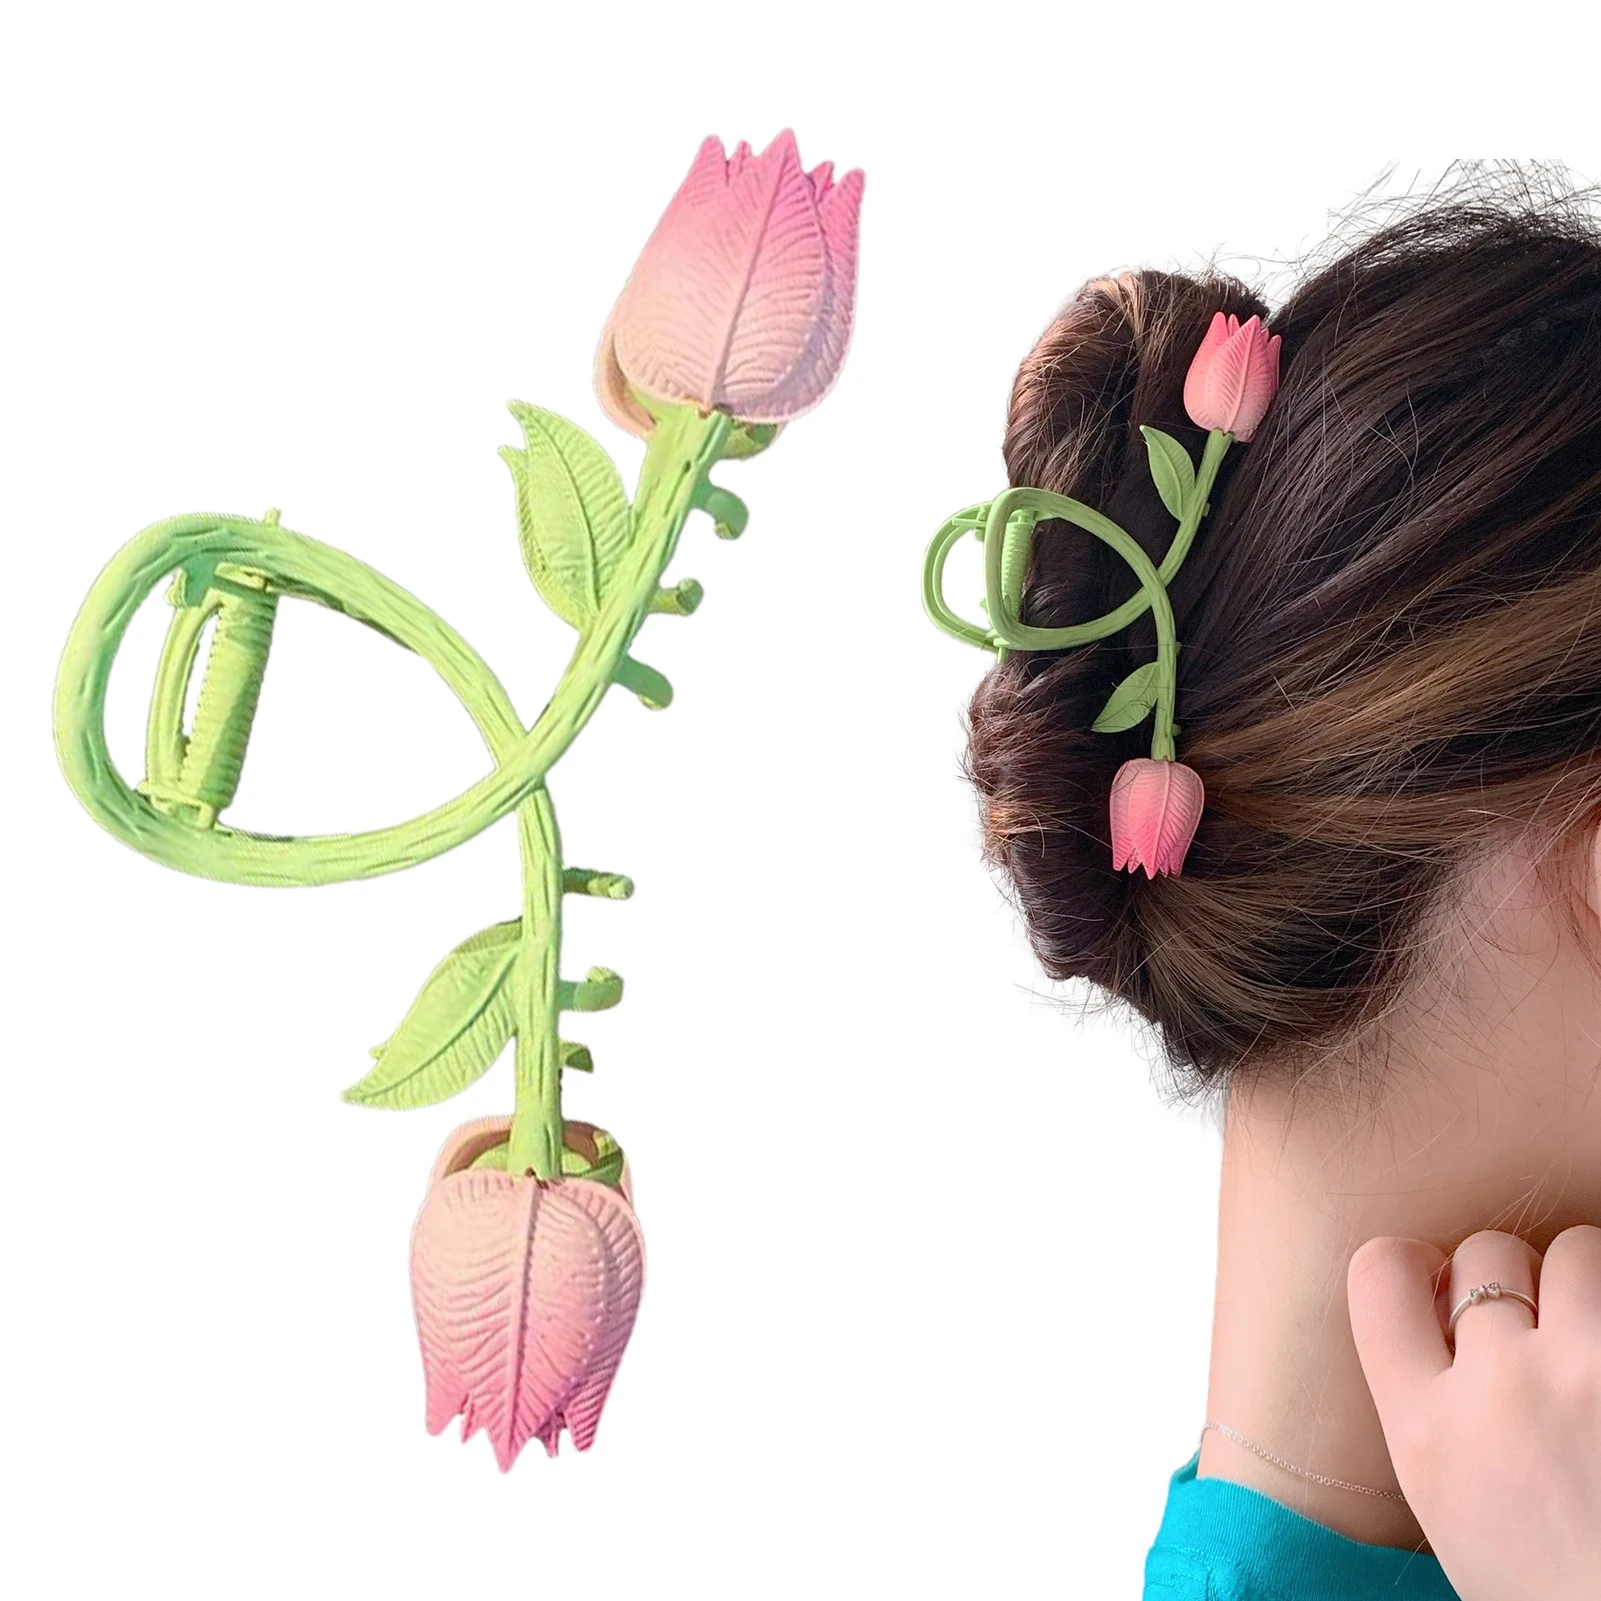 

Large Metal Hair Claw Clips Nonslip 3D Tulip Shape Hair Styling Accessories Strong Hold Hair Jaw Clips With 3D Pink Tulip Decor